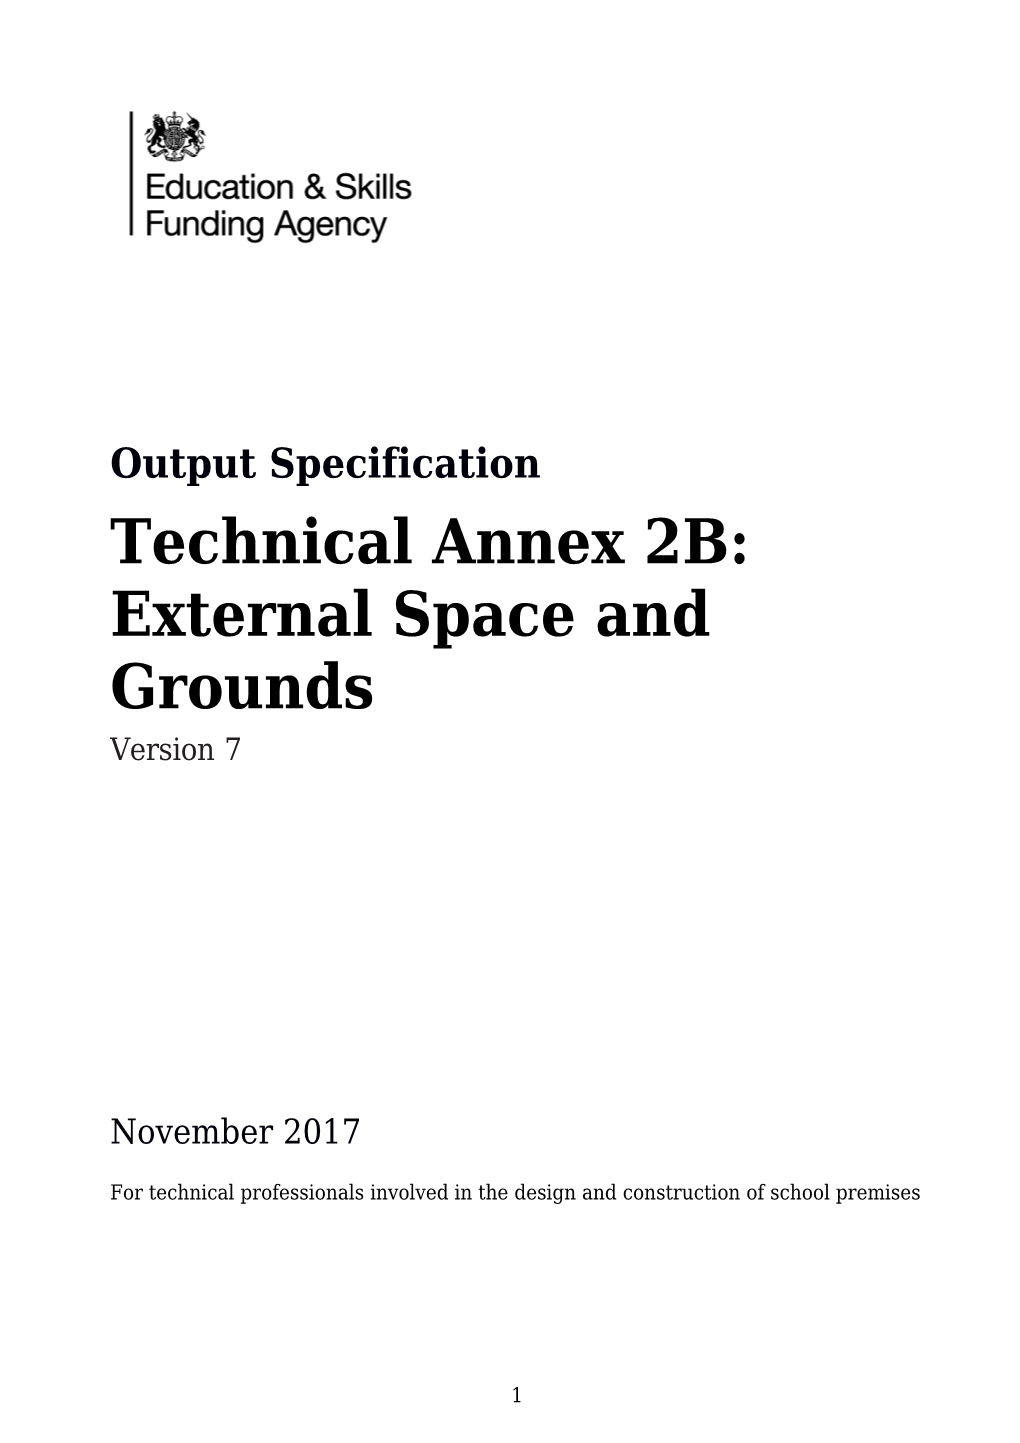 Technical Annex 2B: External Space and Grounds